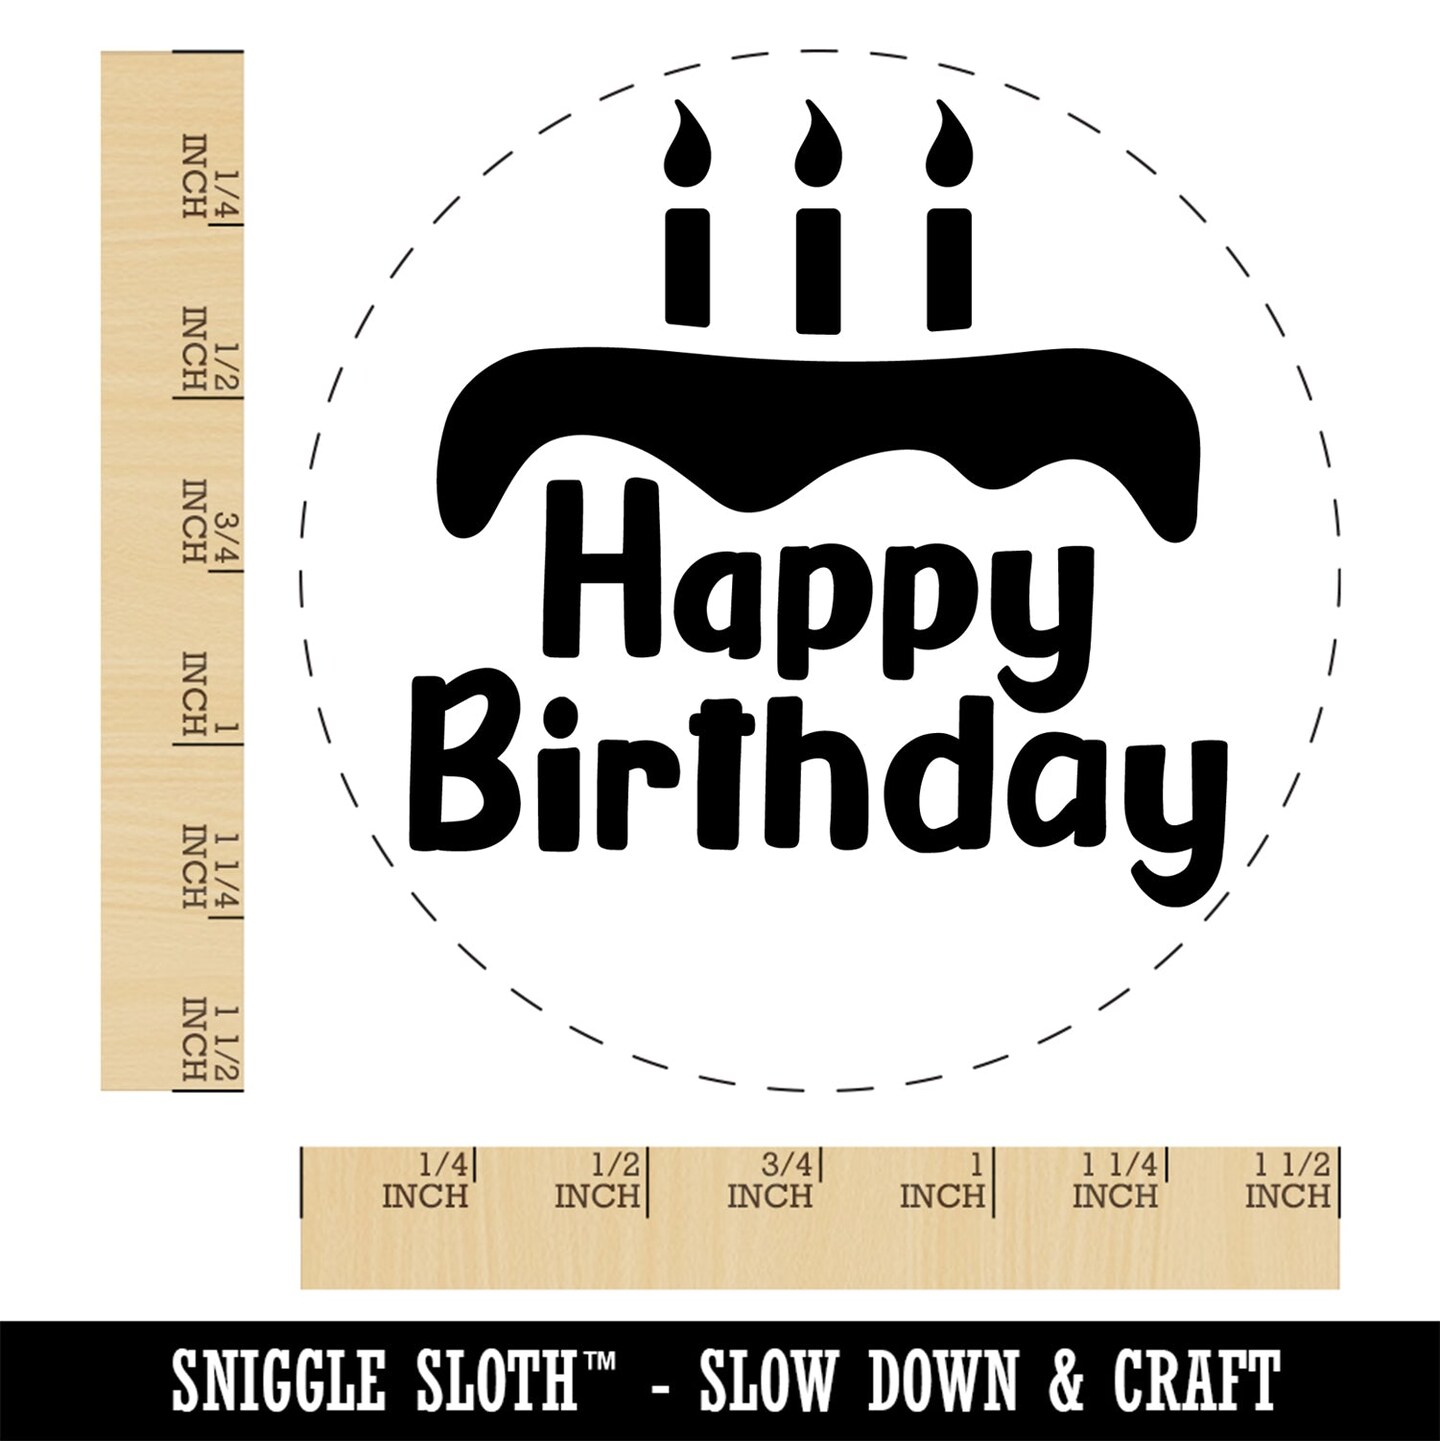 Happy Birthday with Cake Self-Inking Rubber Stamp Ink Stamper for Stamping Crafting Planners